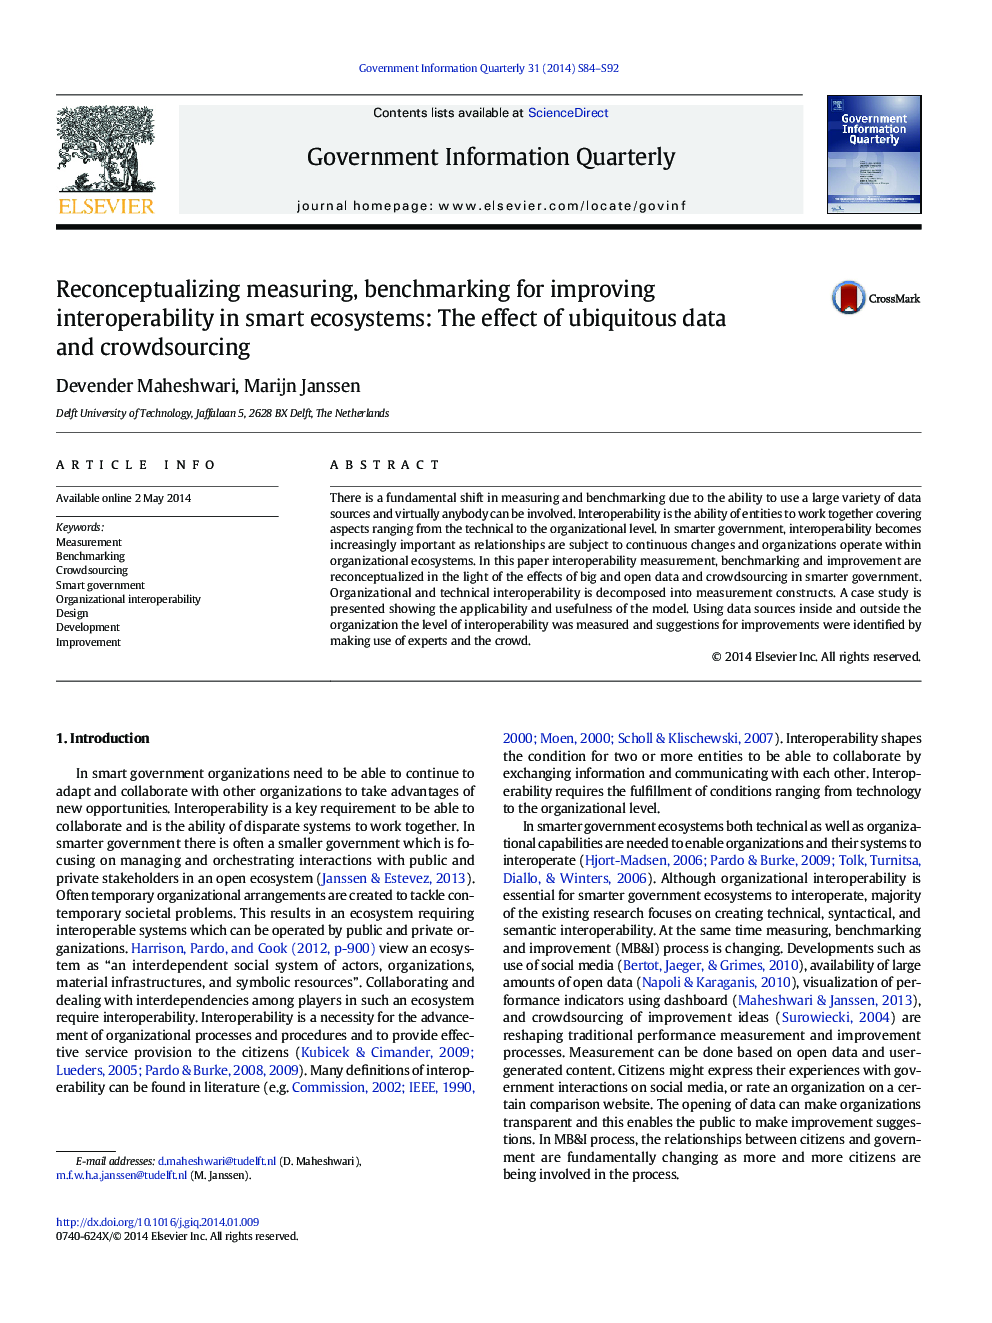 Reconceptualizing measuring, benchmarking for improving interoperability in smart ecosystems: The effect of ubiquitous data and crowdsourcing